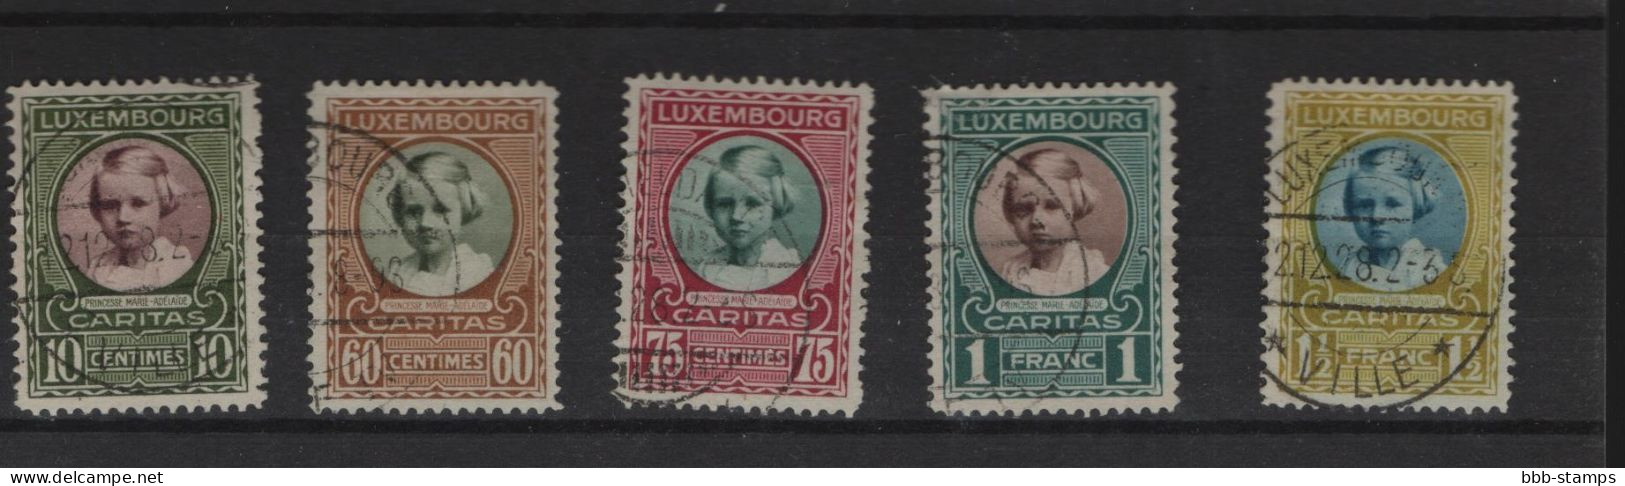 Luxemburg Michel Cat.No.  Used  208/212 (2) - Usados